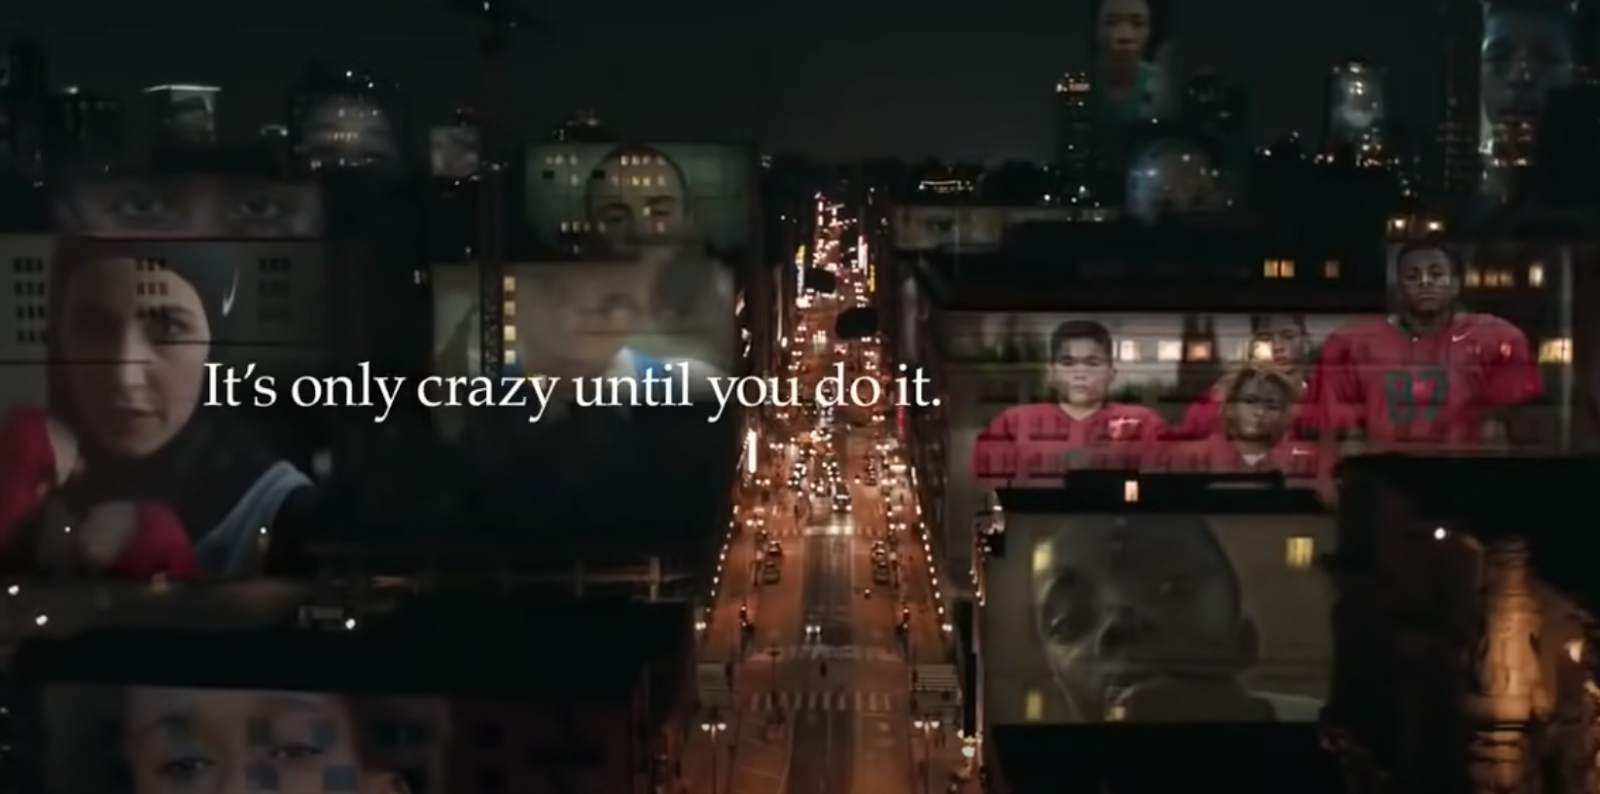 Nike mastered using persuasive techniques in advertising. This Nike ad, "Its only crazy until you do it" taps into human emotions